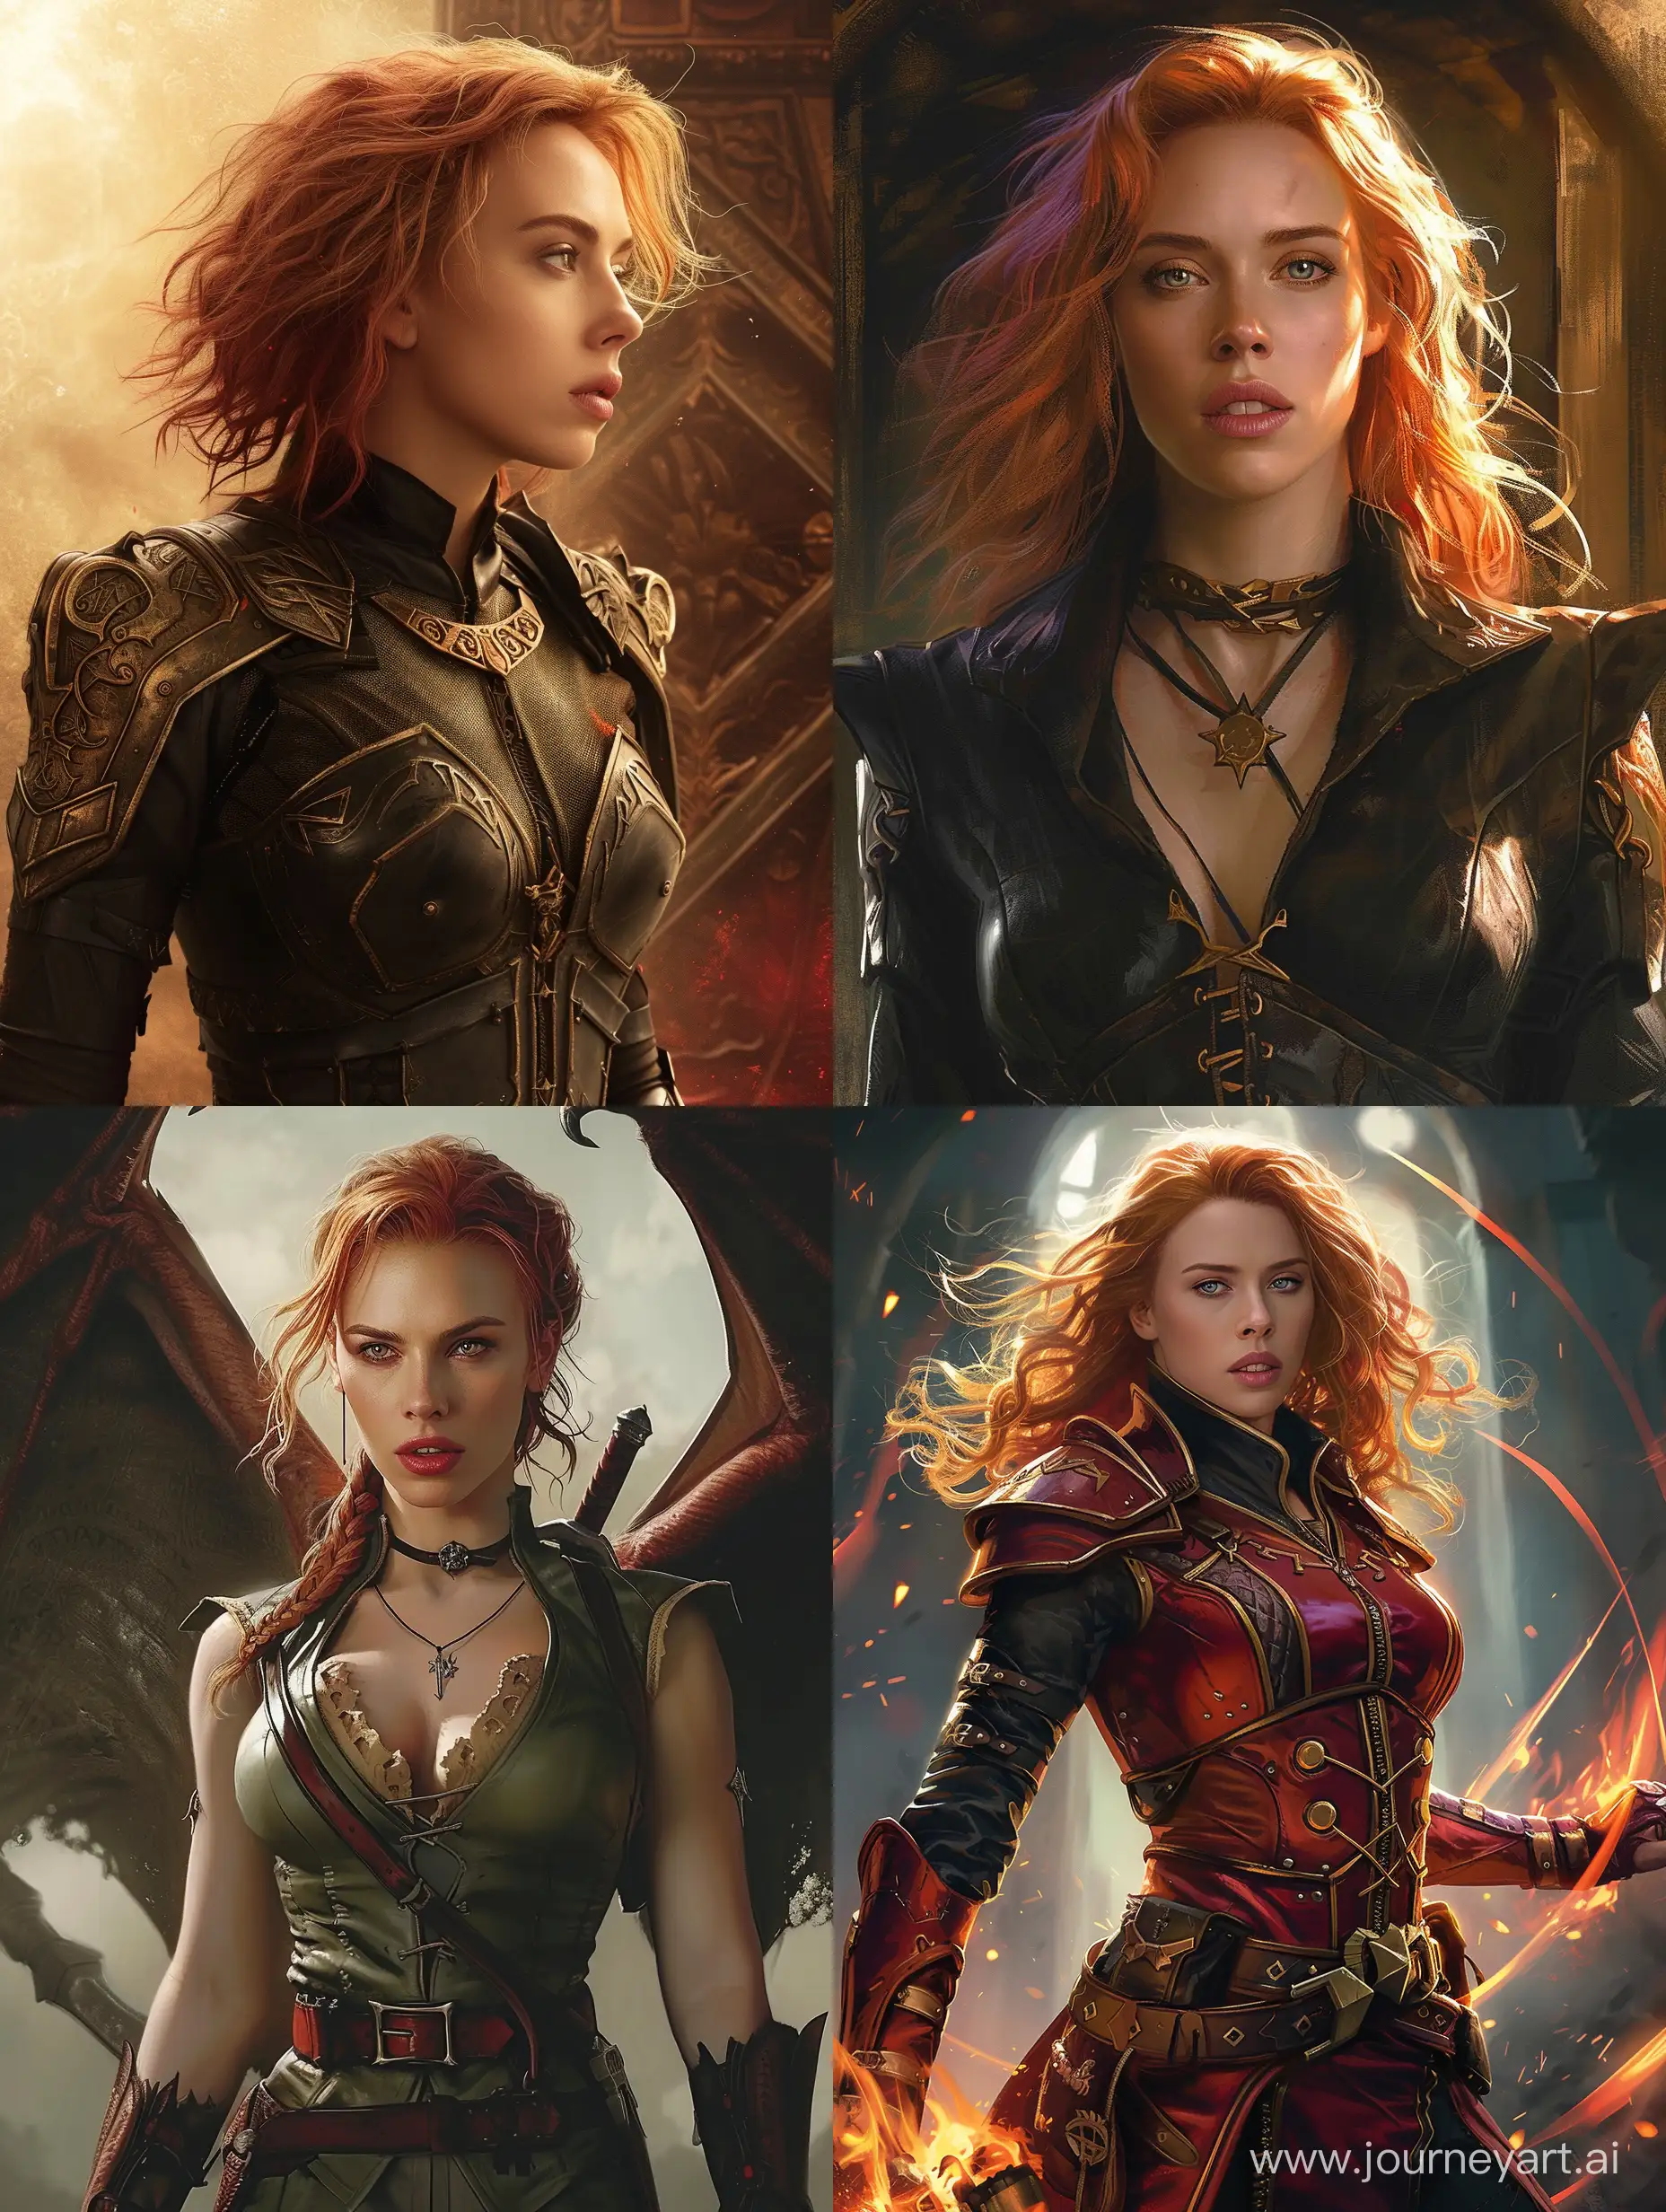 Scarlett-Johansson-Portraying-a-Dungeons-Dragons-Character-in-Cosmic-Setting